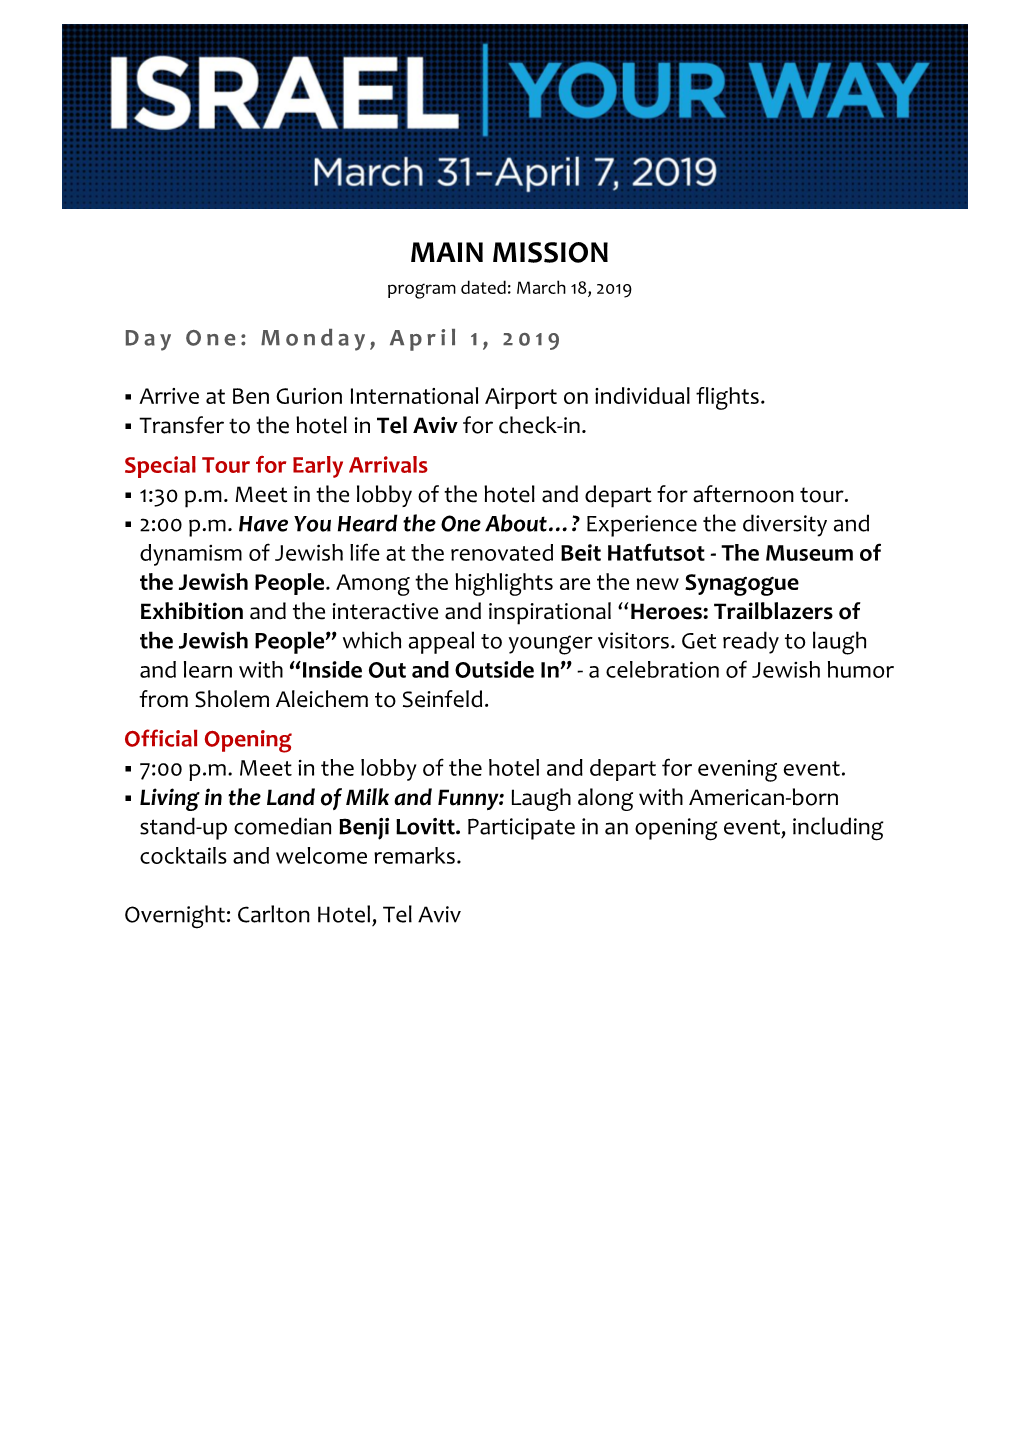 MAIN MISSION Program Dated: March 18, 2019